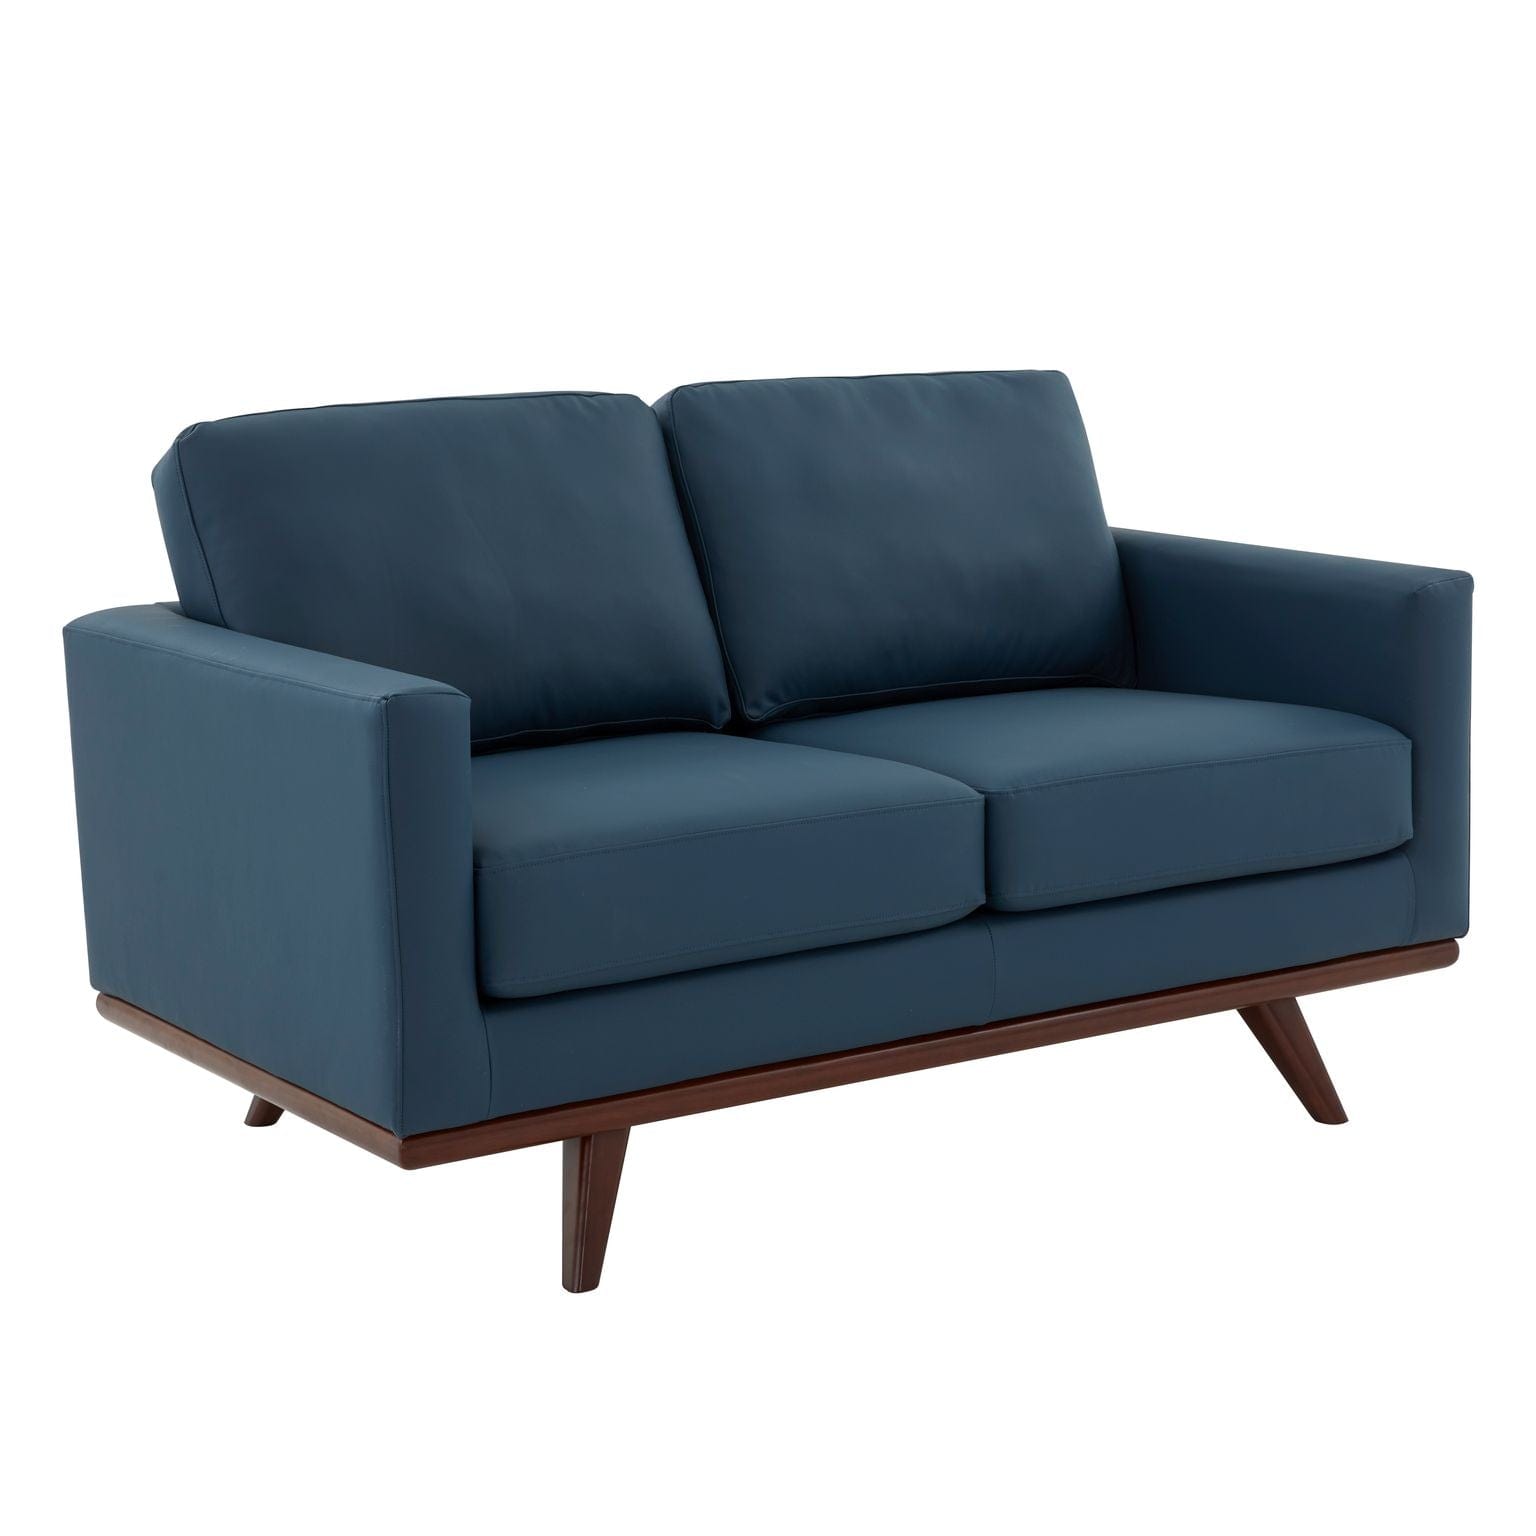 LeisureMod Chester Leather Loveseat - Navy Blue